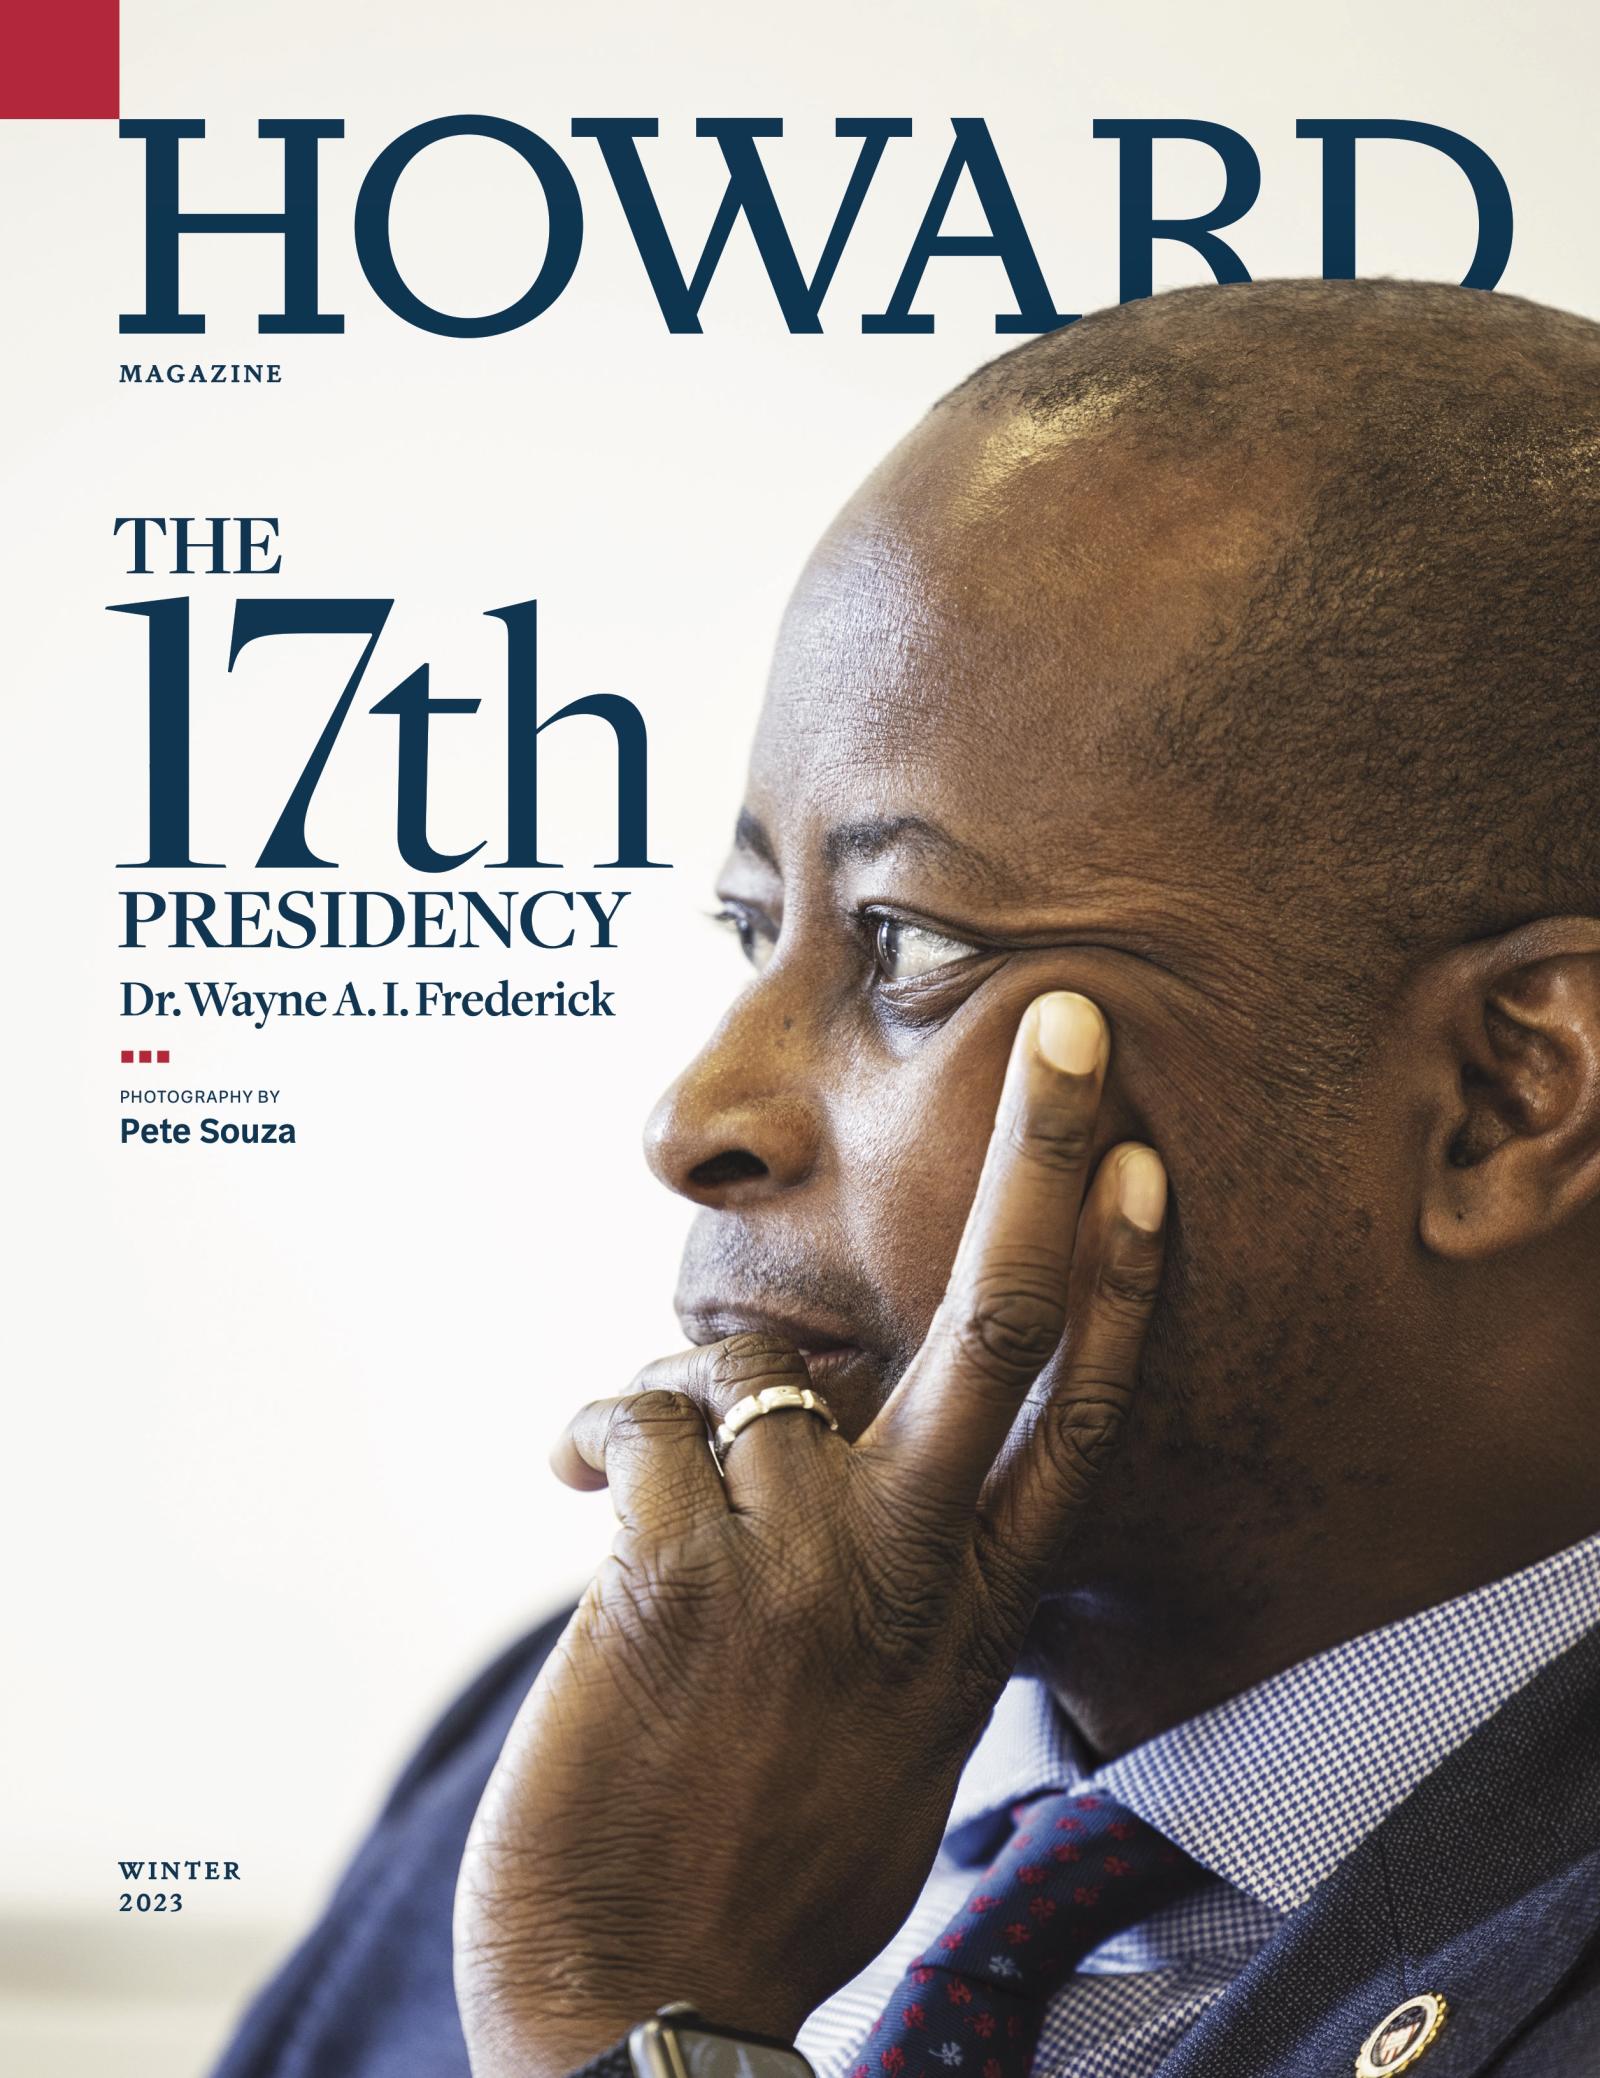 Howard Magazine Winter 2023 cover with Dr. Frederick, 17th Presidency